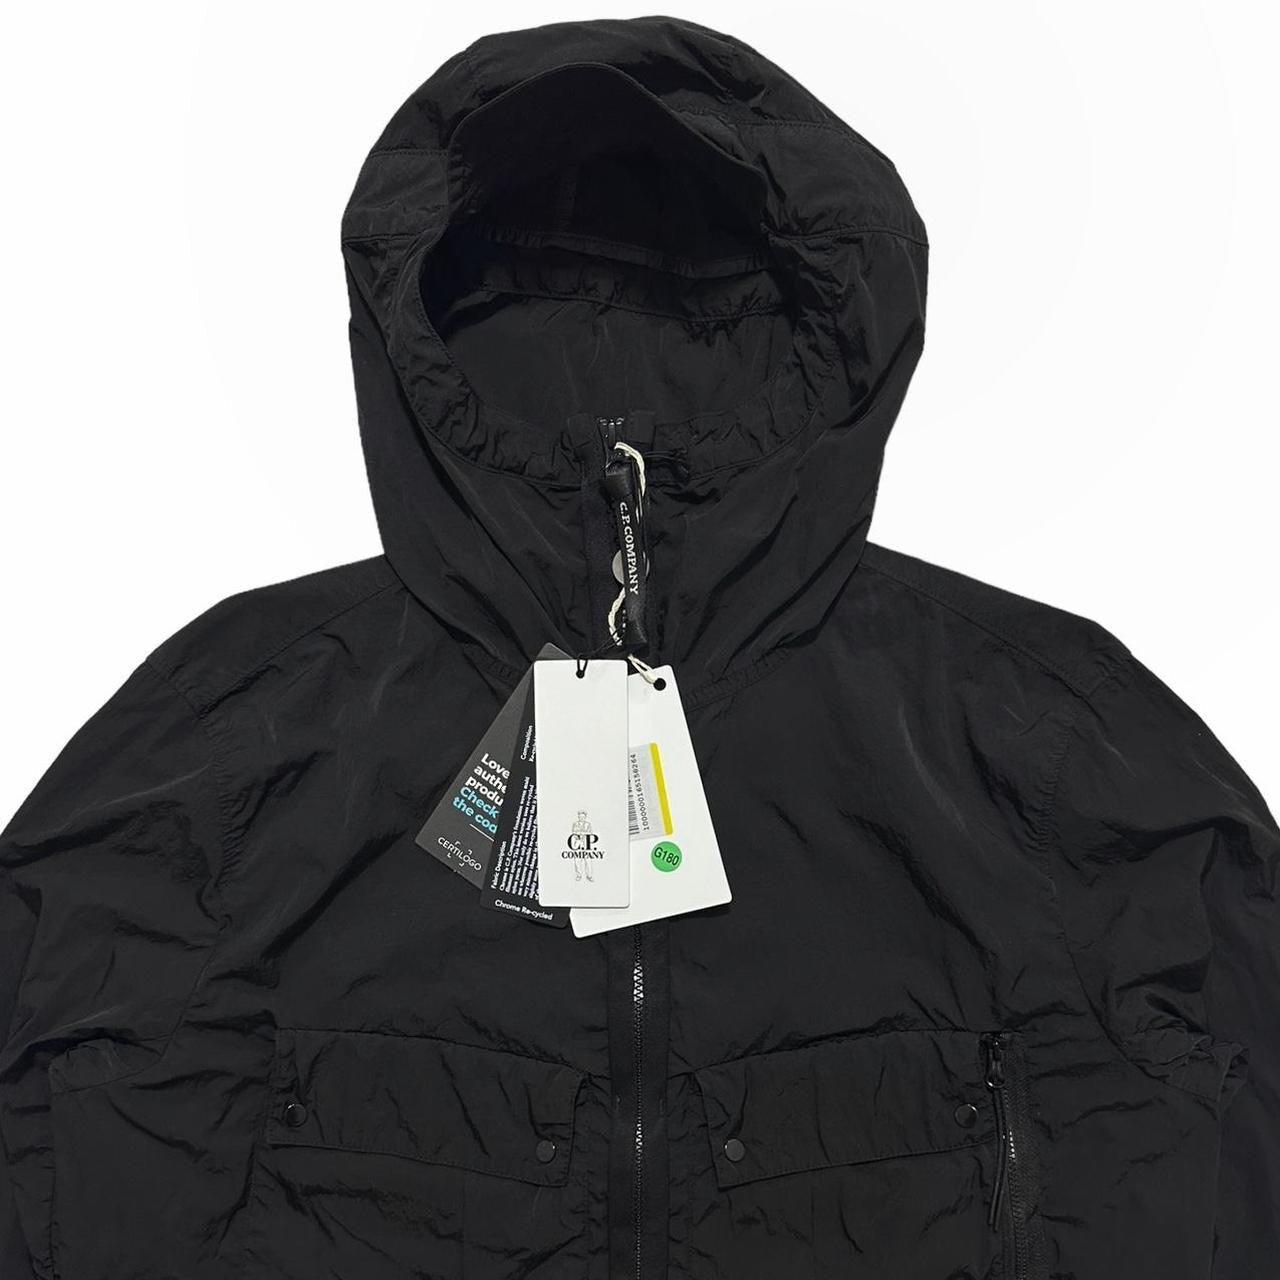 CP Company Chrome-R Black Double Pocket Jacket - Known Source